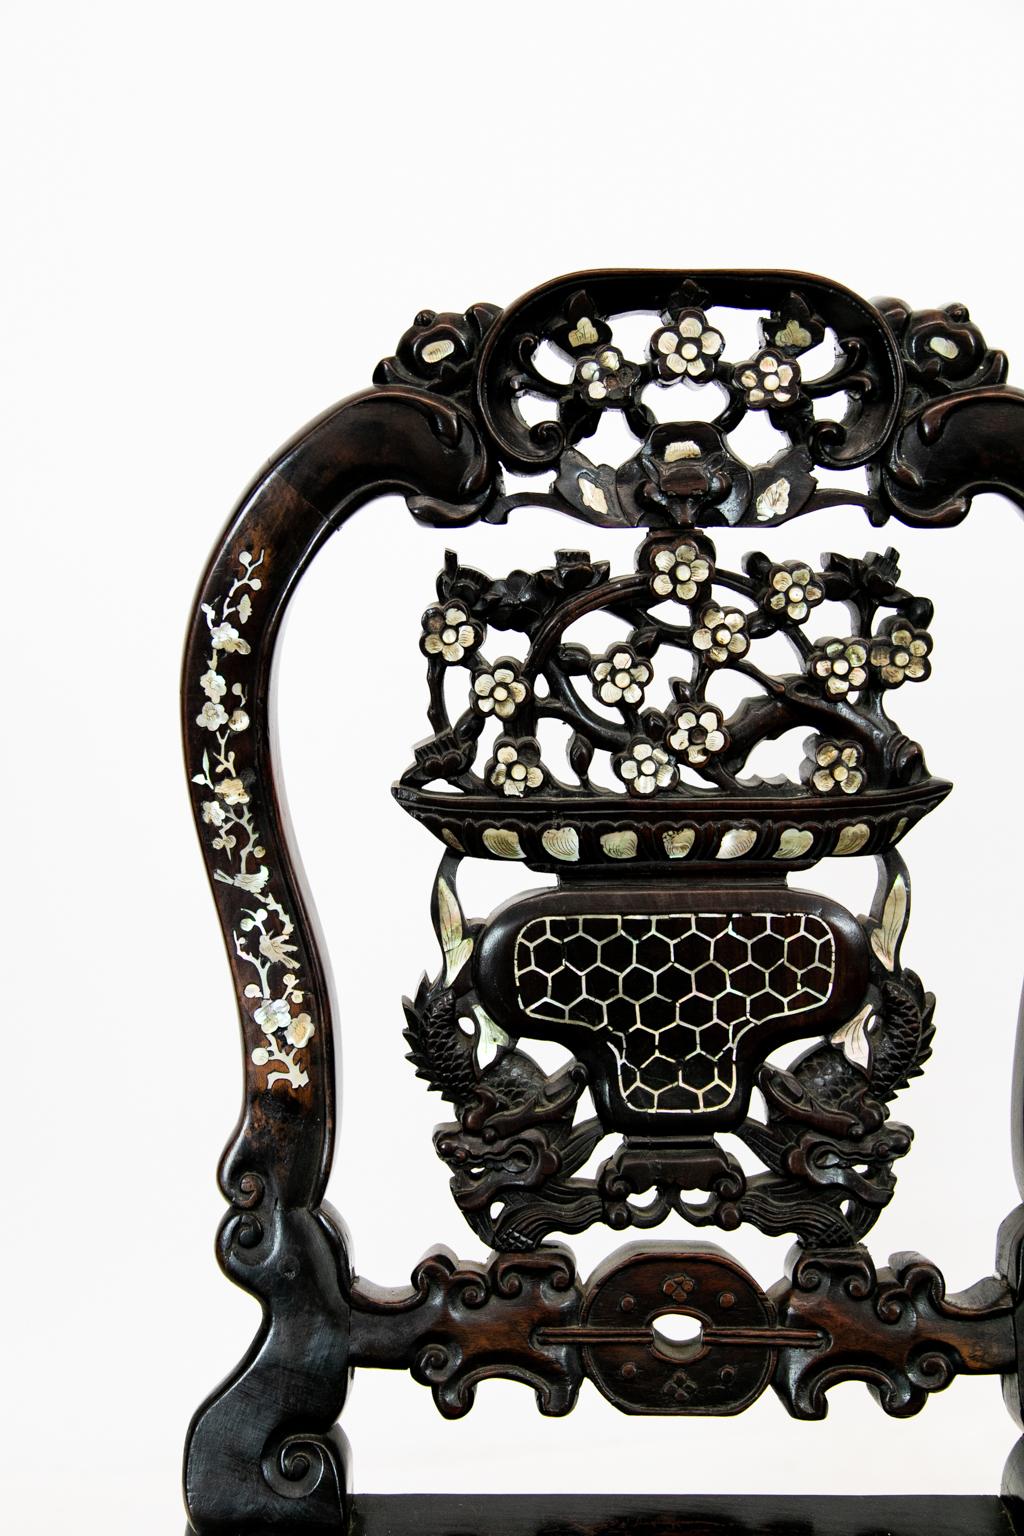 19th century pair of Chinese rosewood mother of pearl inlaid chairs, each has a C-scroll crest with mother of pearl inlaid flowers; reticulated center splat featuring inlaid mother of pearl flowers, carved wolf's head and carved dragons; the chair